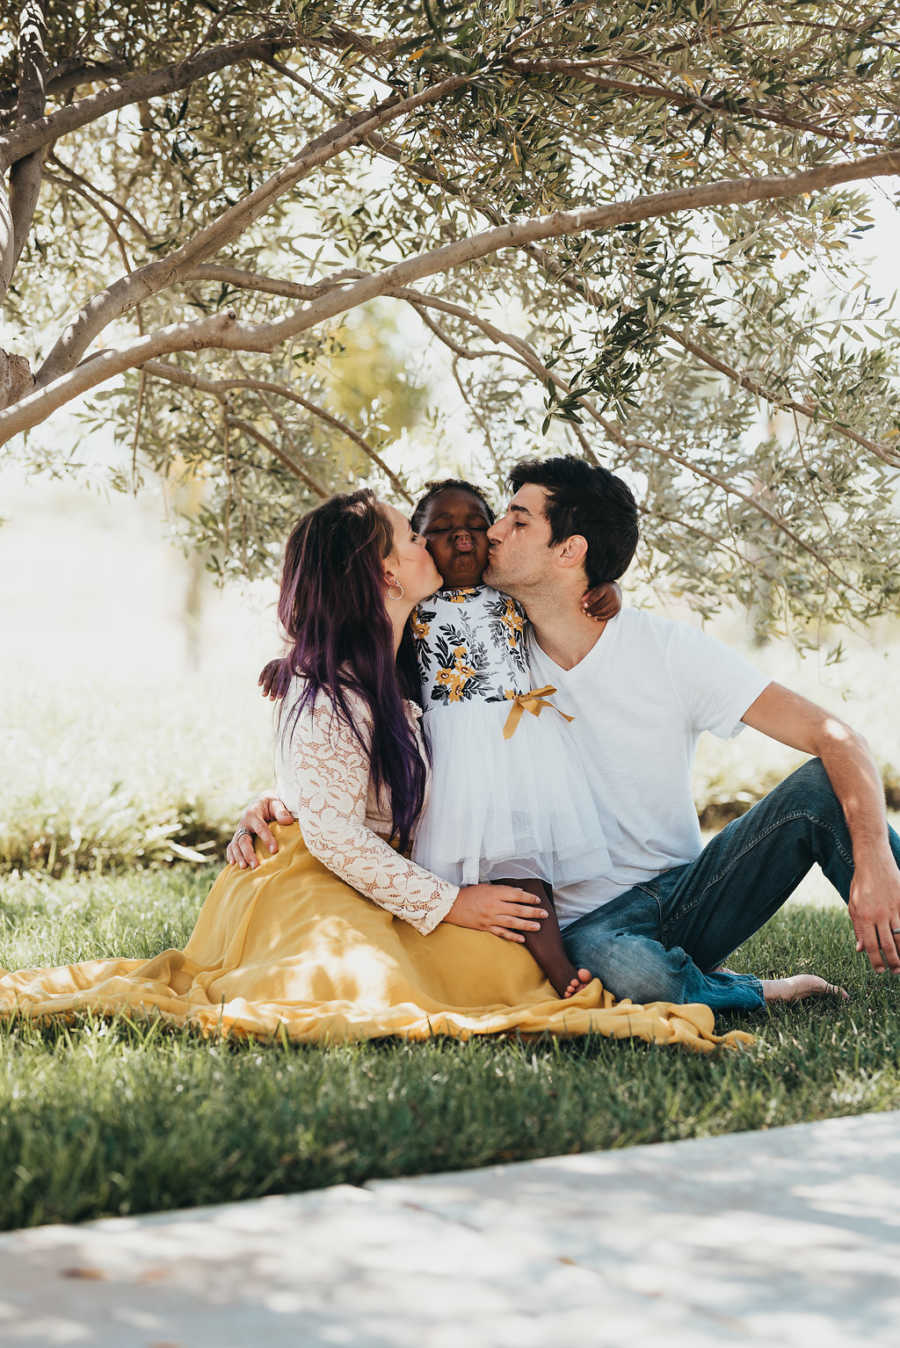 Husband and wife sit on grass kissing their adopted daughters cheeks who sits between them